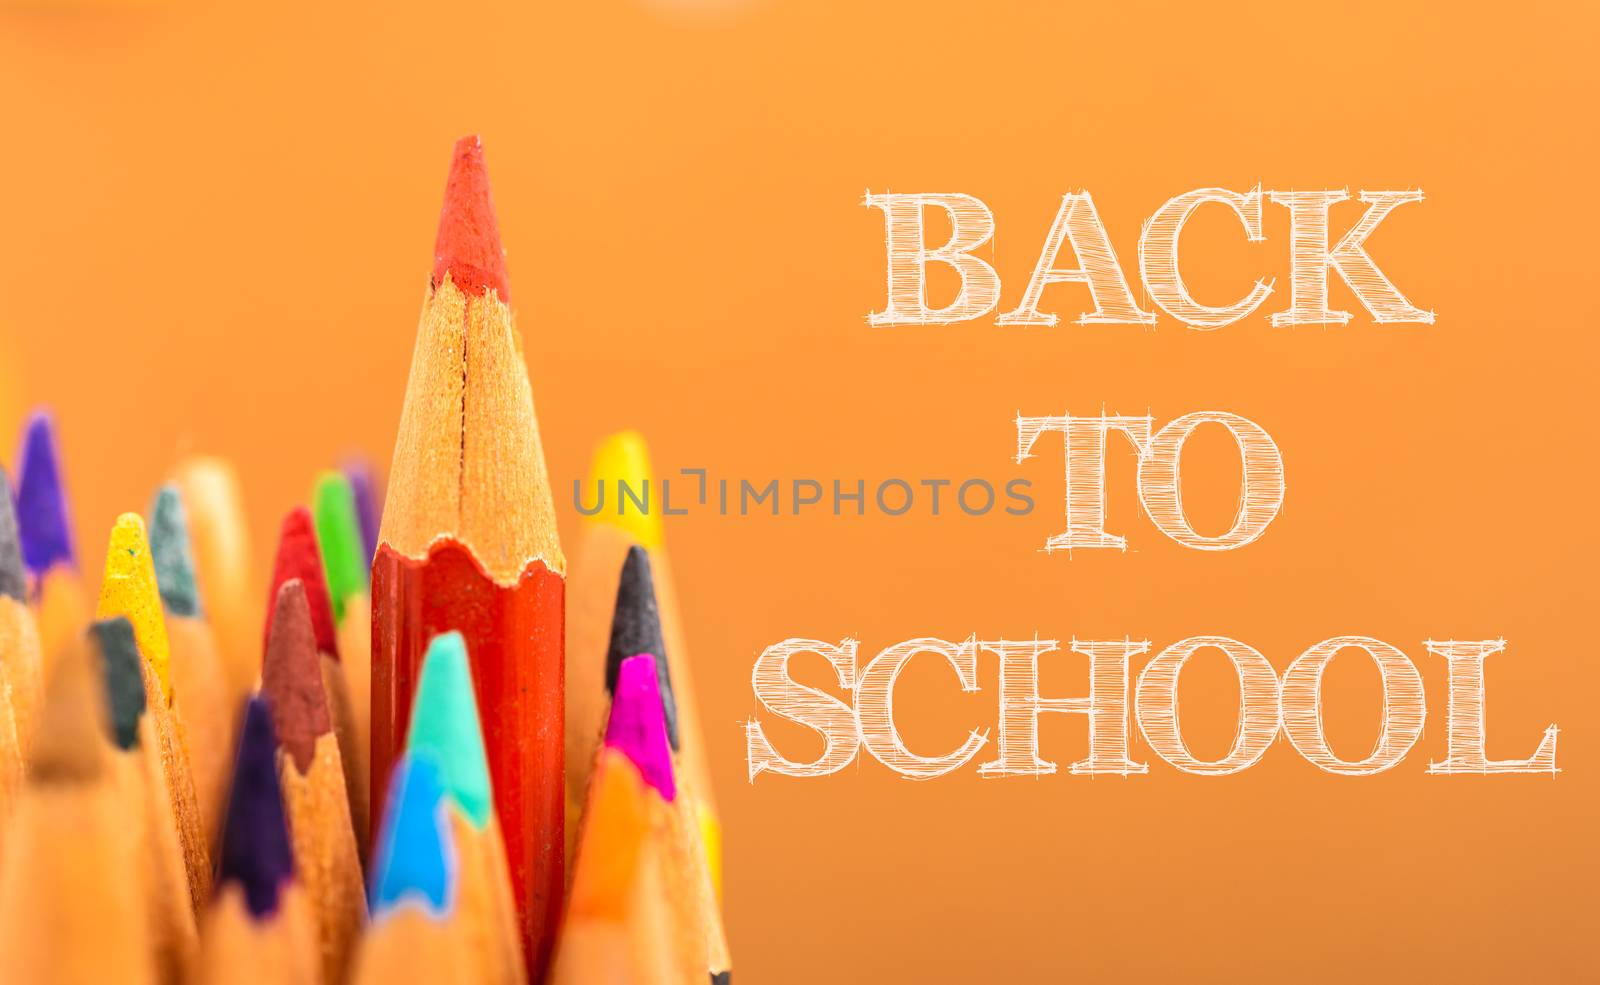 Back to school, Red pencil standing out from crowd, plenty business success concept